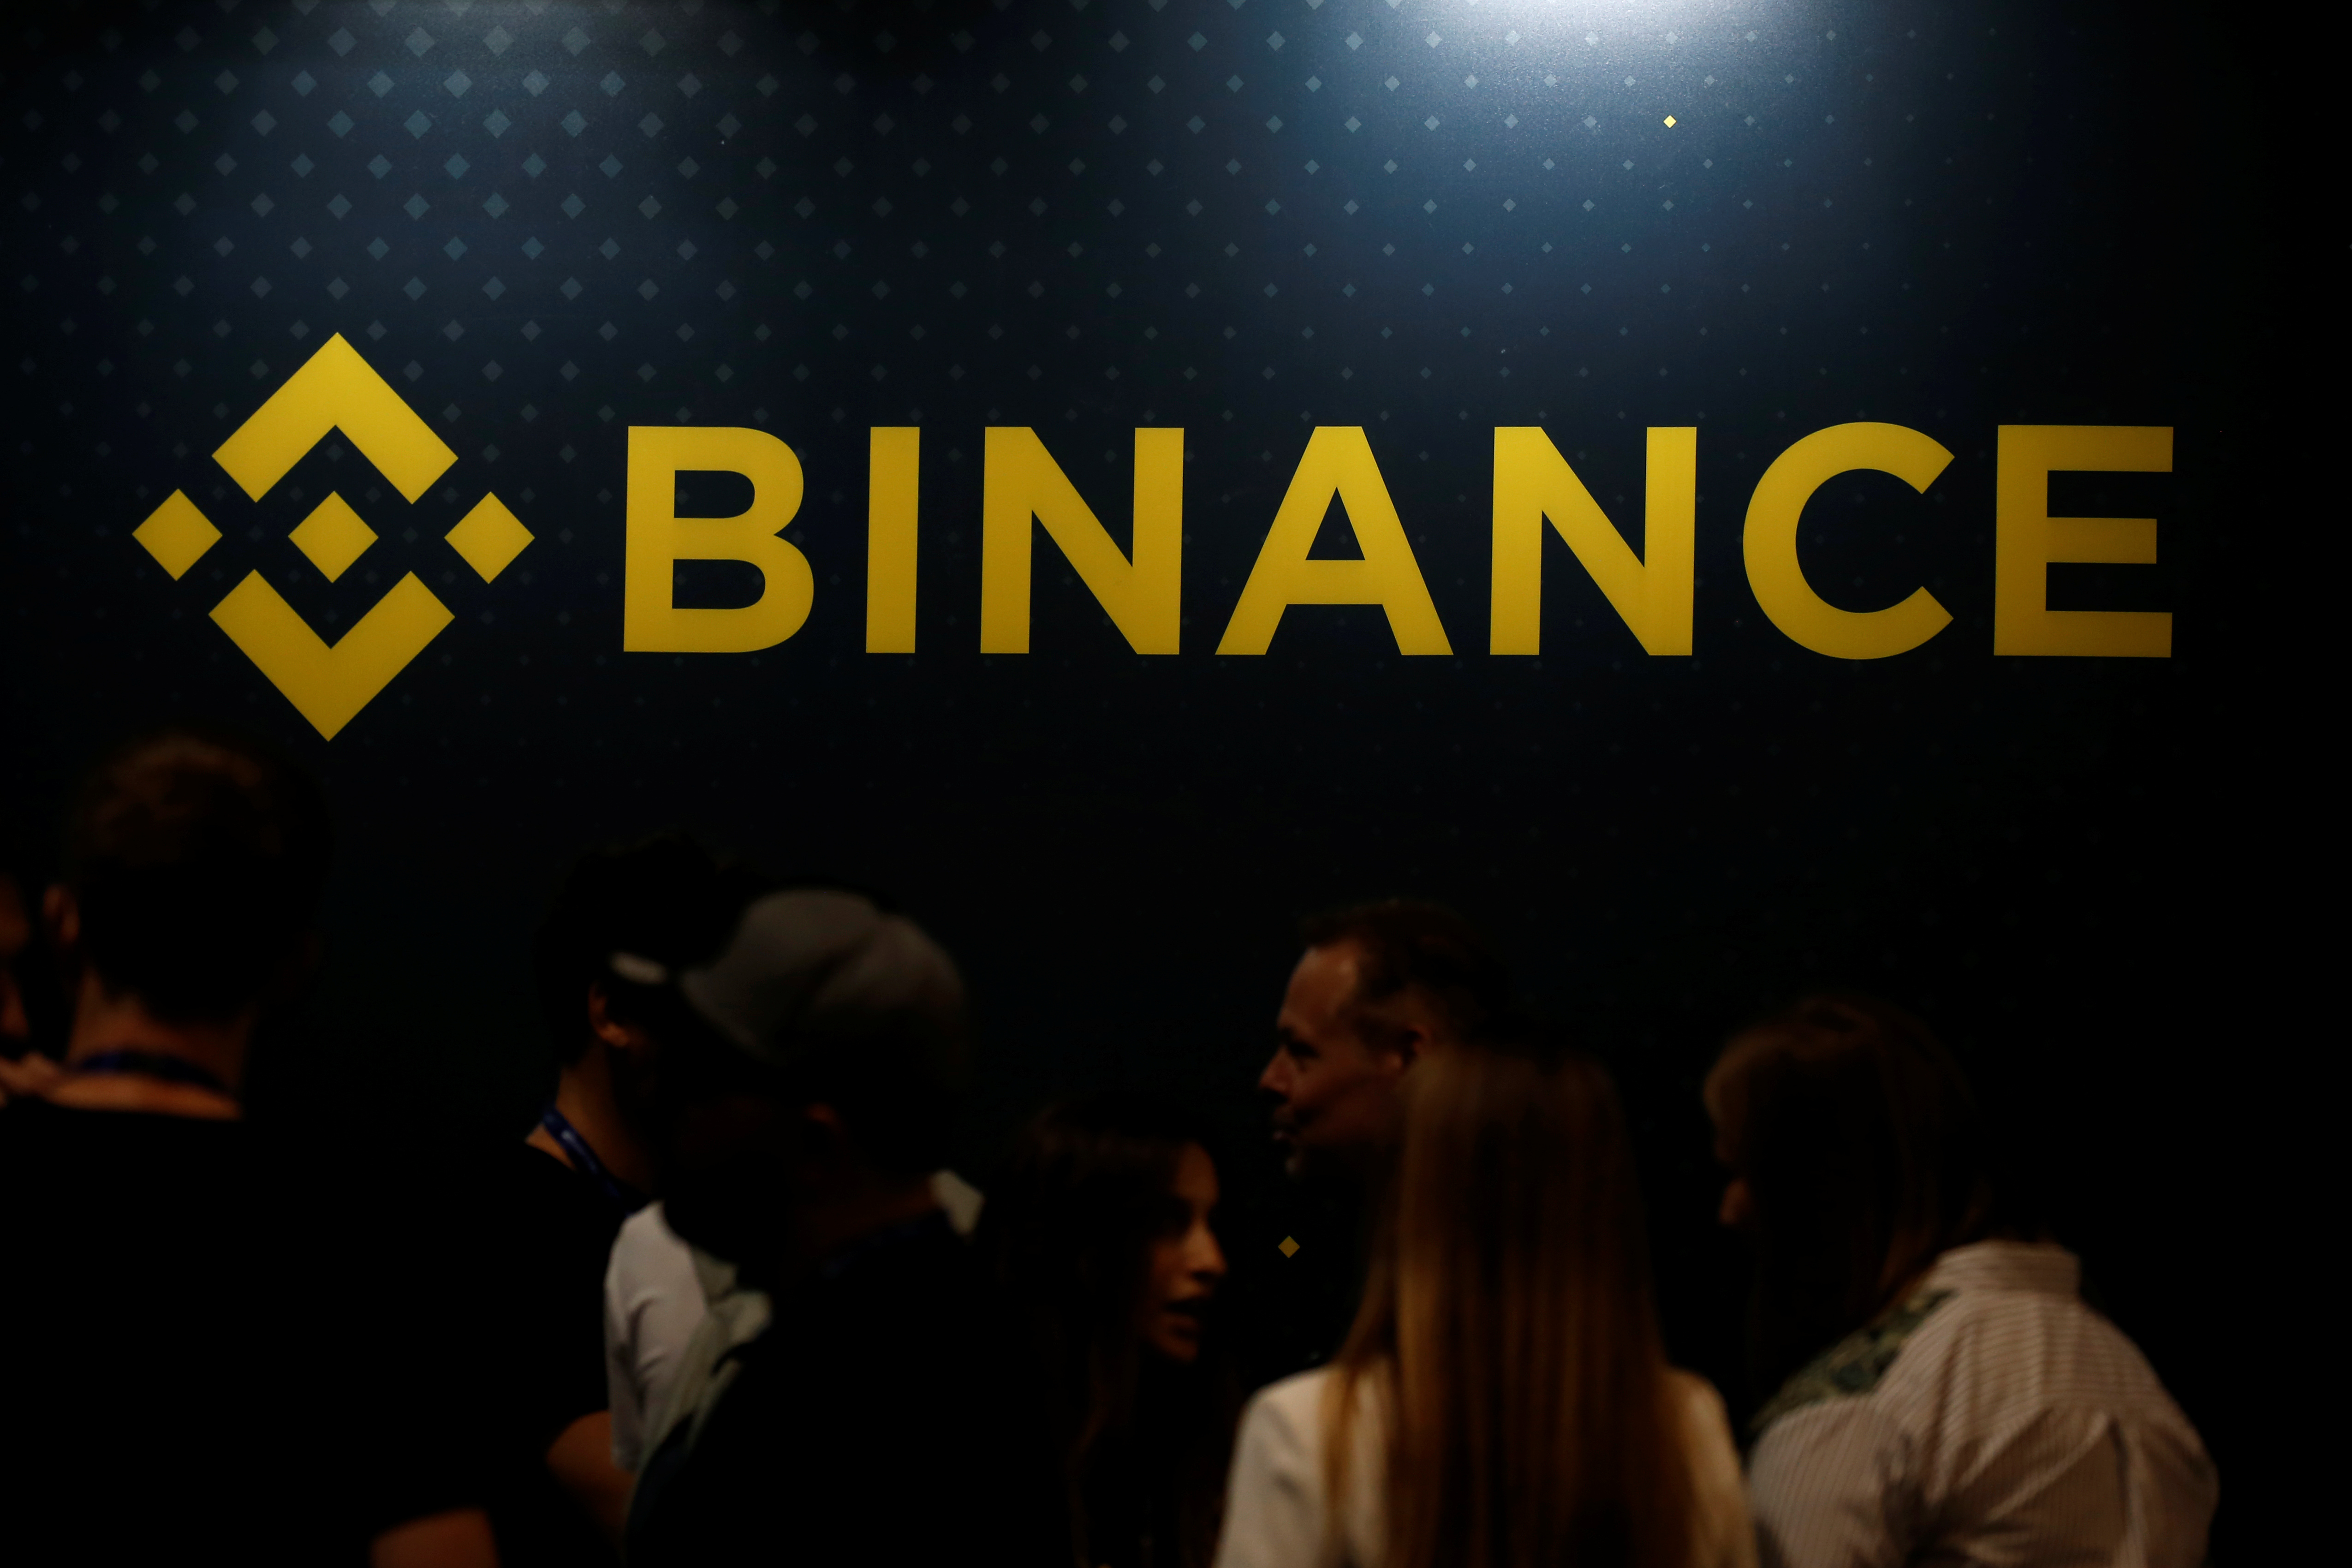 The logo of Binance is seen on their exhibition stand at the Delta Summit, Malta's official Blockchain and Digital Innovation event promoting cryptocurrency, in Ta' Qali, Malta October 3, 2019. REUTERS/Darrin Zammit Lupi